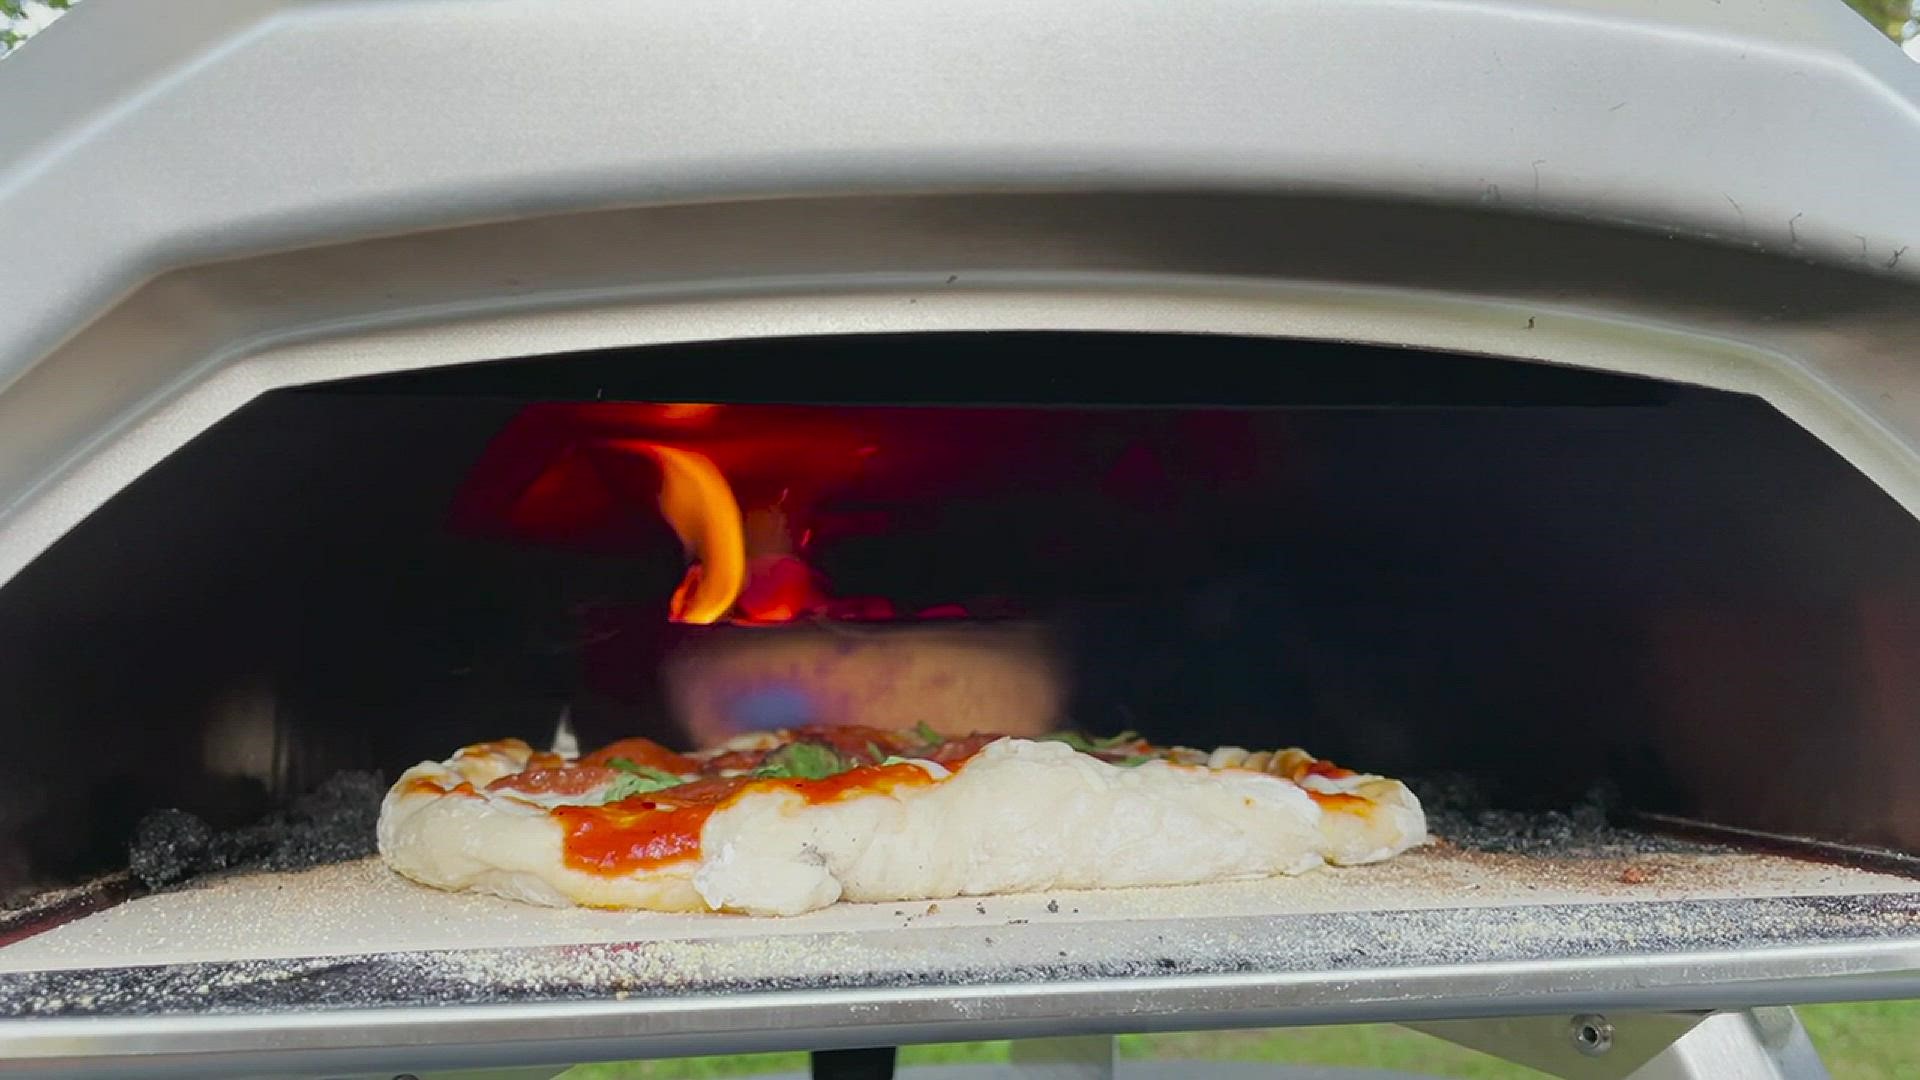 With so many new portable tabletop pizza ovens on the market, Consumer Reports was determined to find out if it’s possible to bring a pizzeria to your own backyard